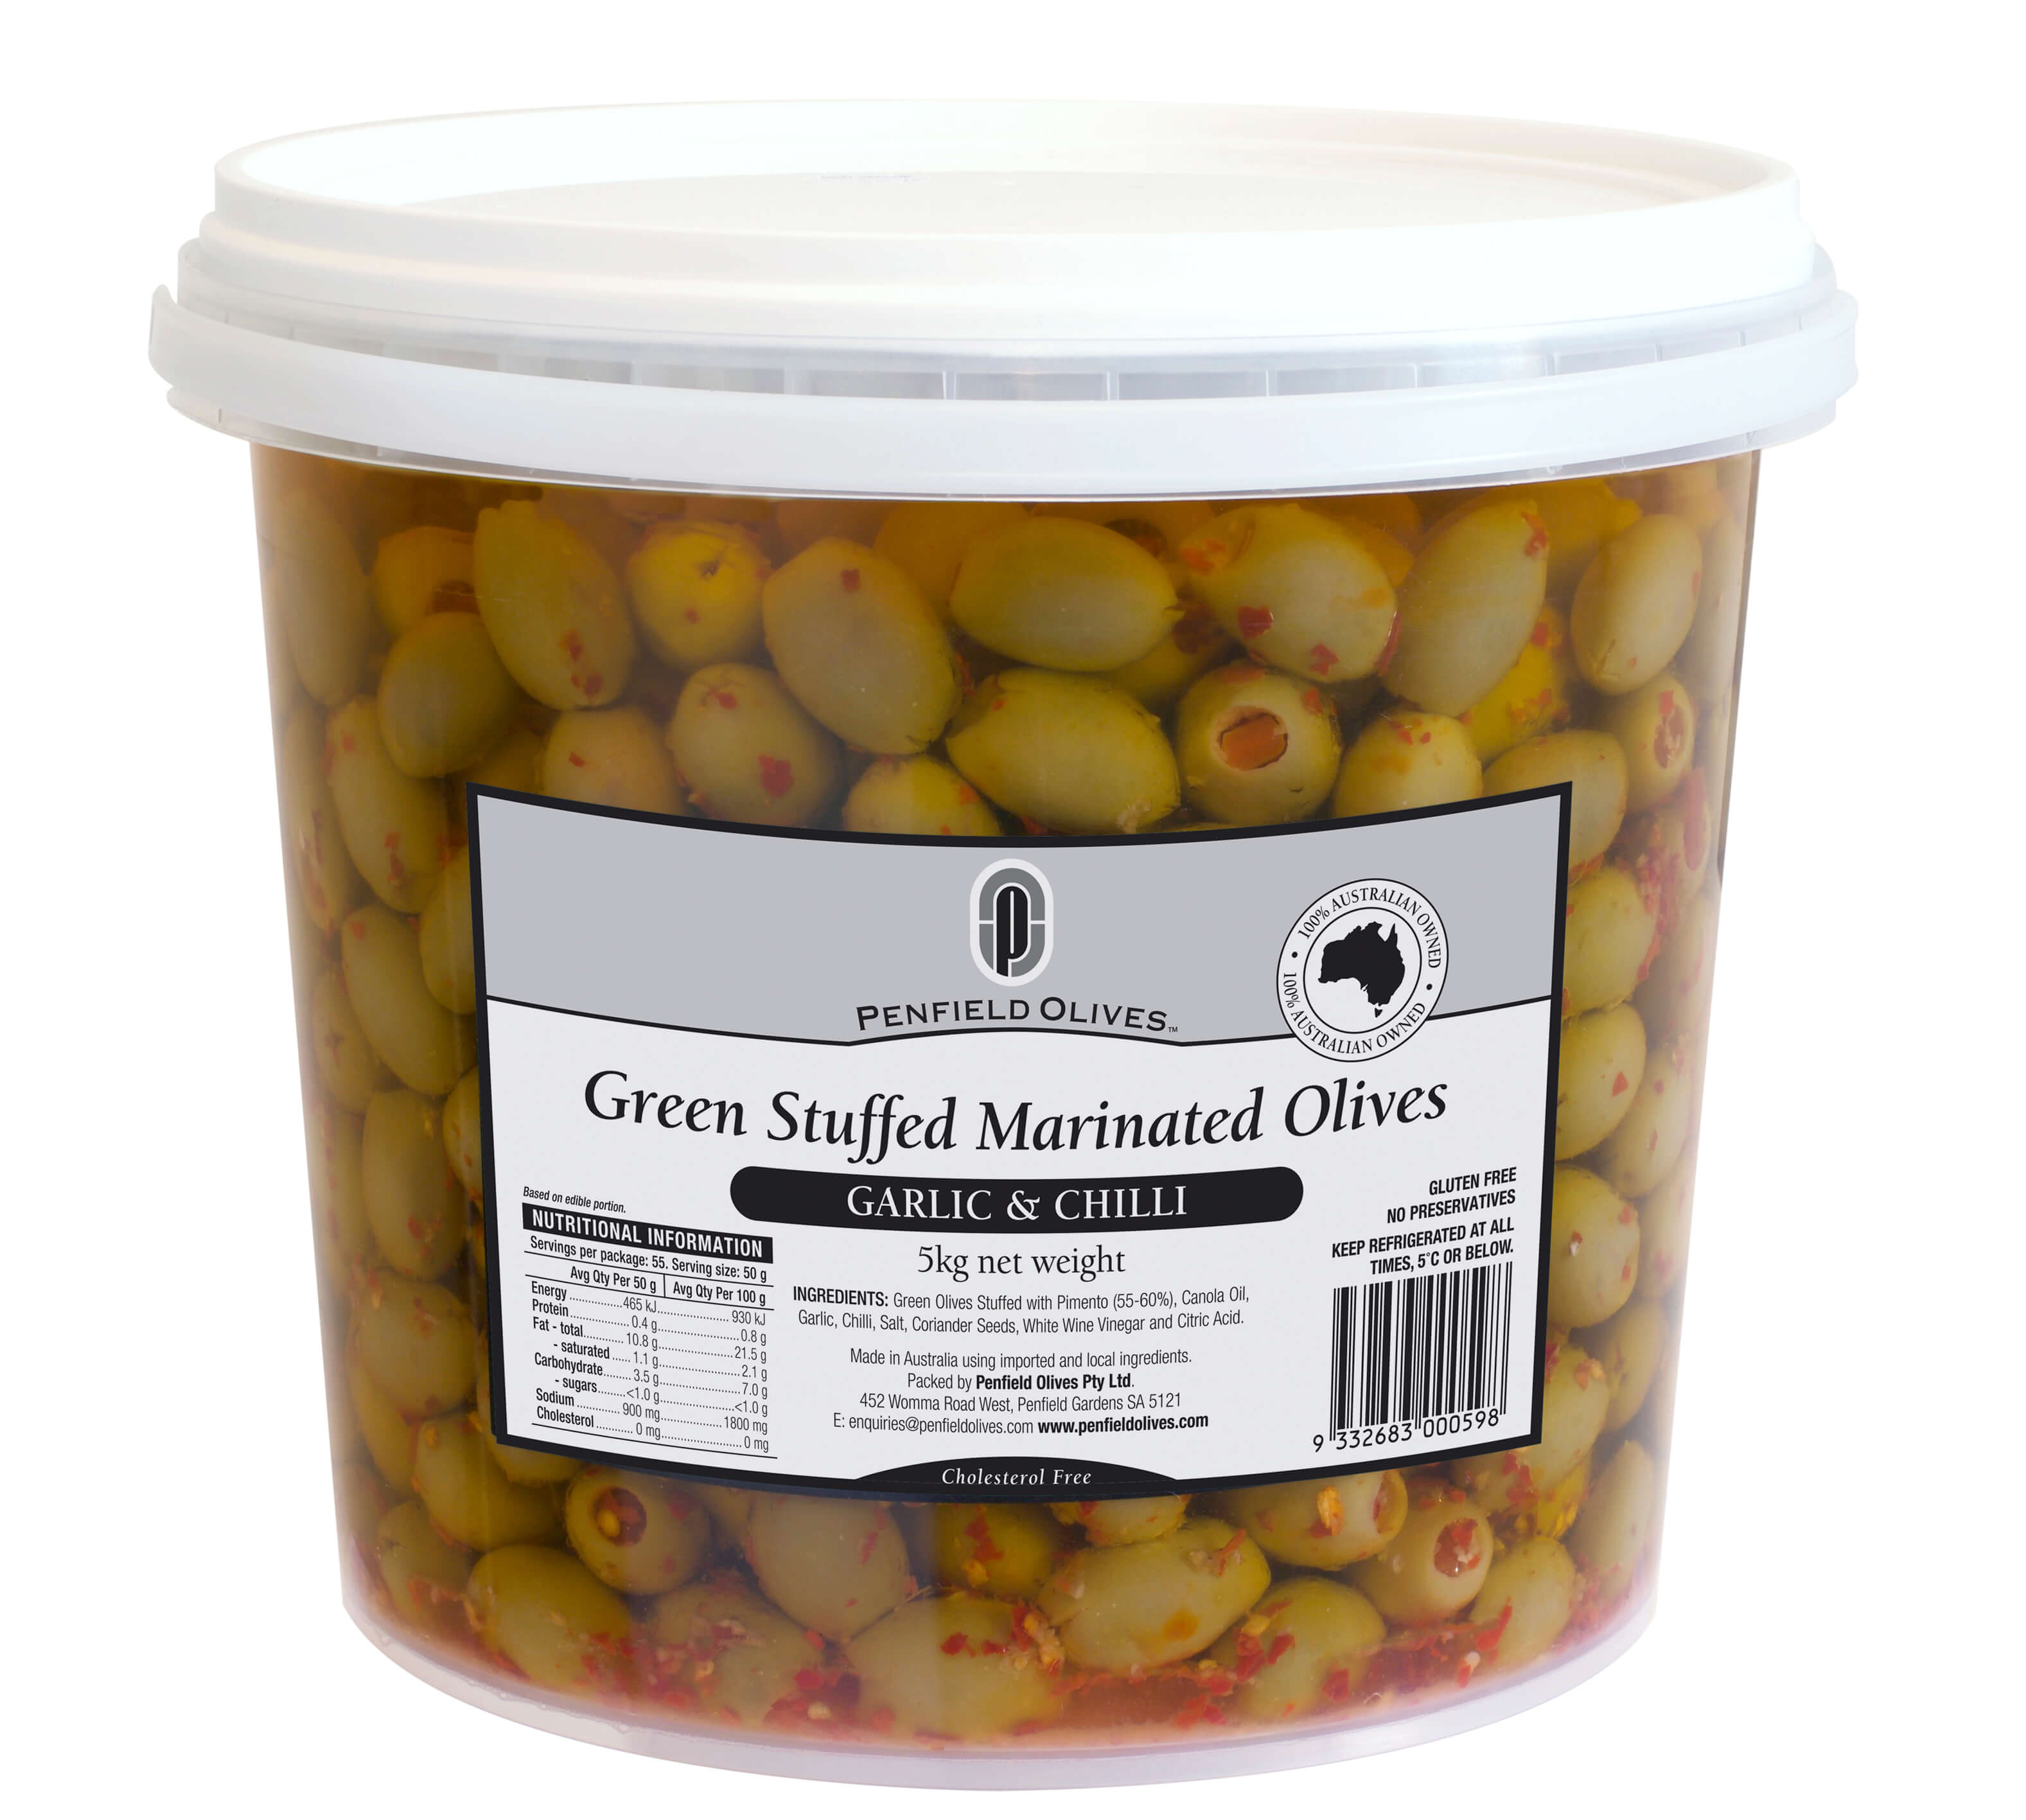 Penfield Olives food service page pic, 5kg Green Stuffed Marinated Olives in Chilli and Garlic in a clear container with a white lid.